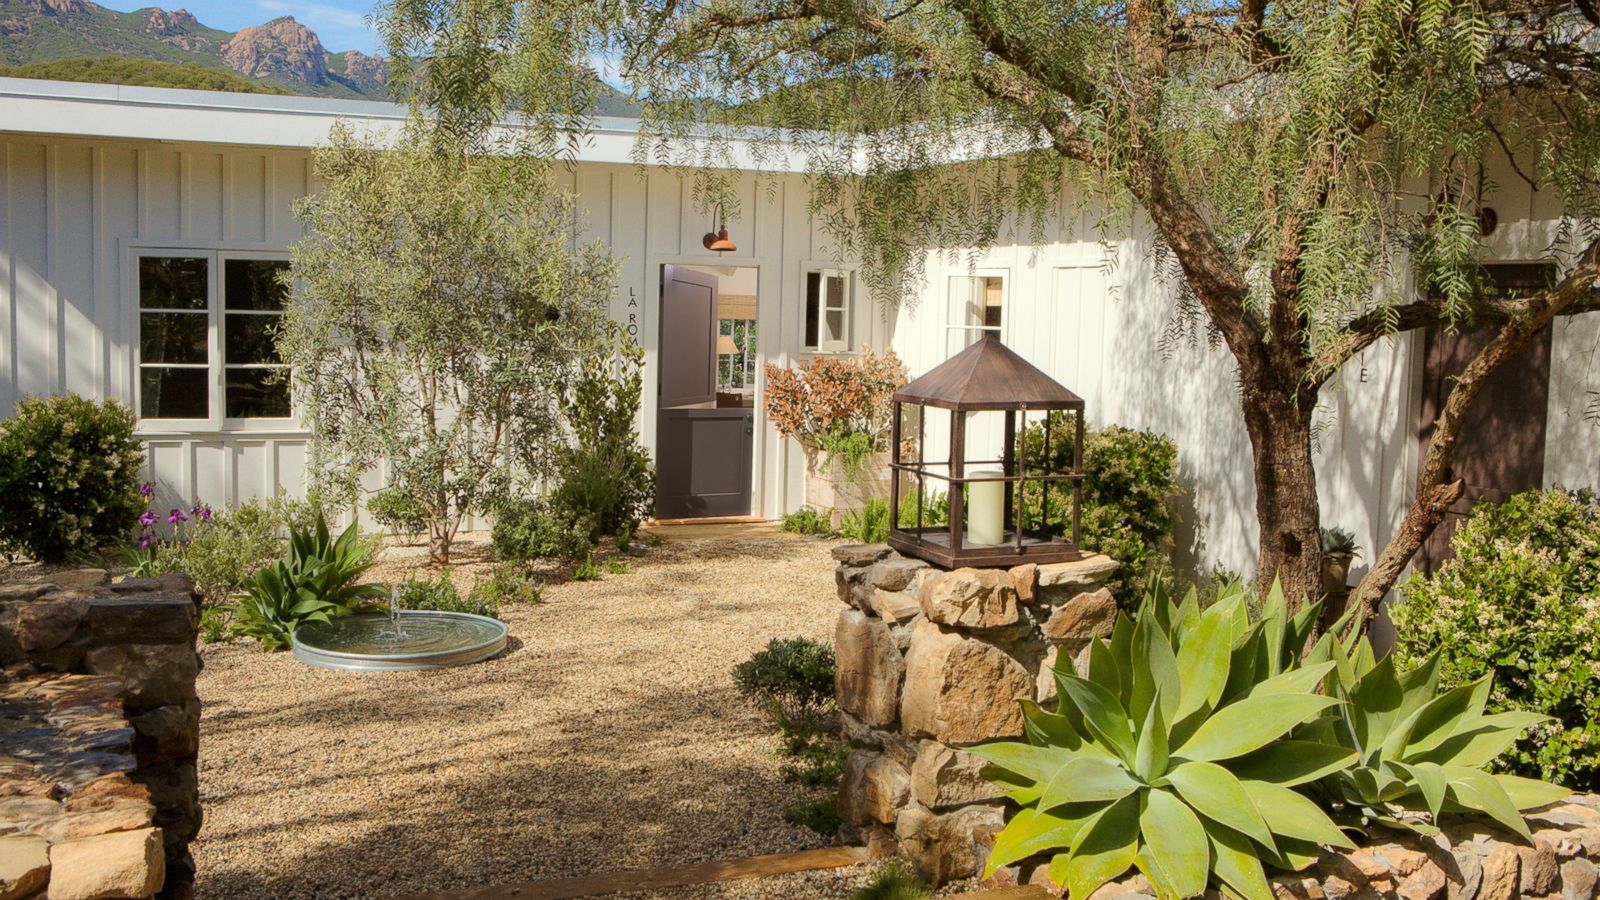 PHOTO: The exterior of a guest room at The Ranch Malibu is photographed here.